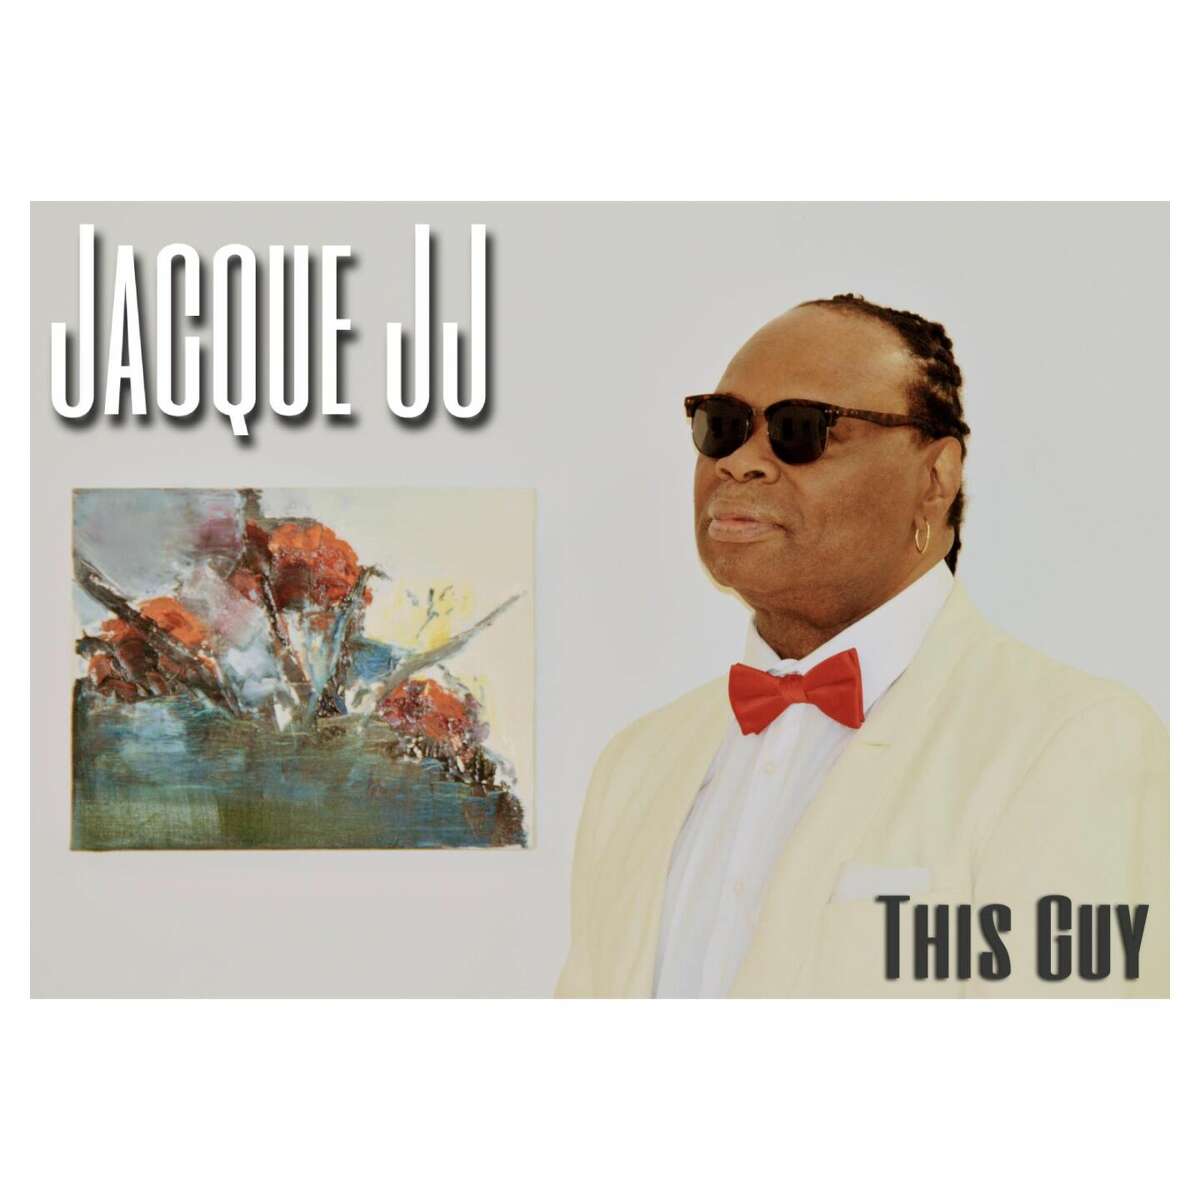 Torrington resident Jacque Williams, a singer-songwriter, is releasing “This Guy”,March 1. Half the proceeds will go to local nonprofit organizations including food banks and a local homeless shelter.